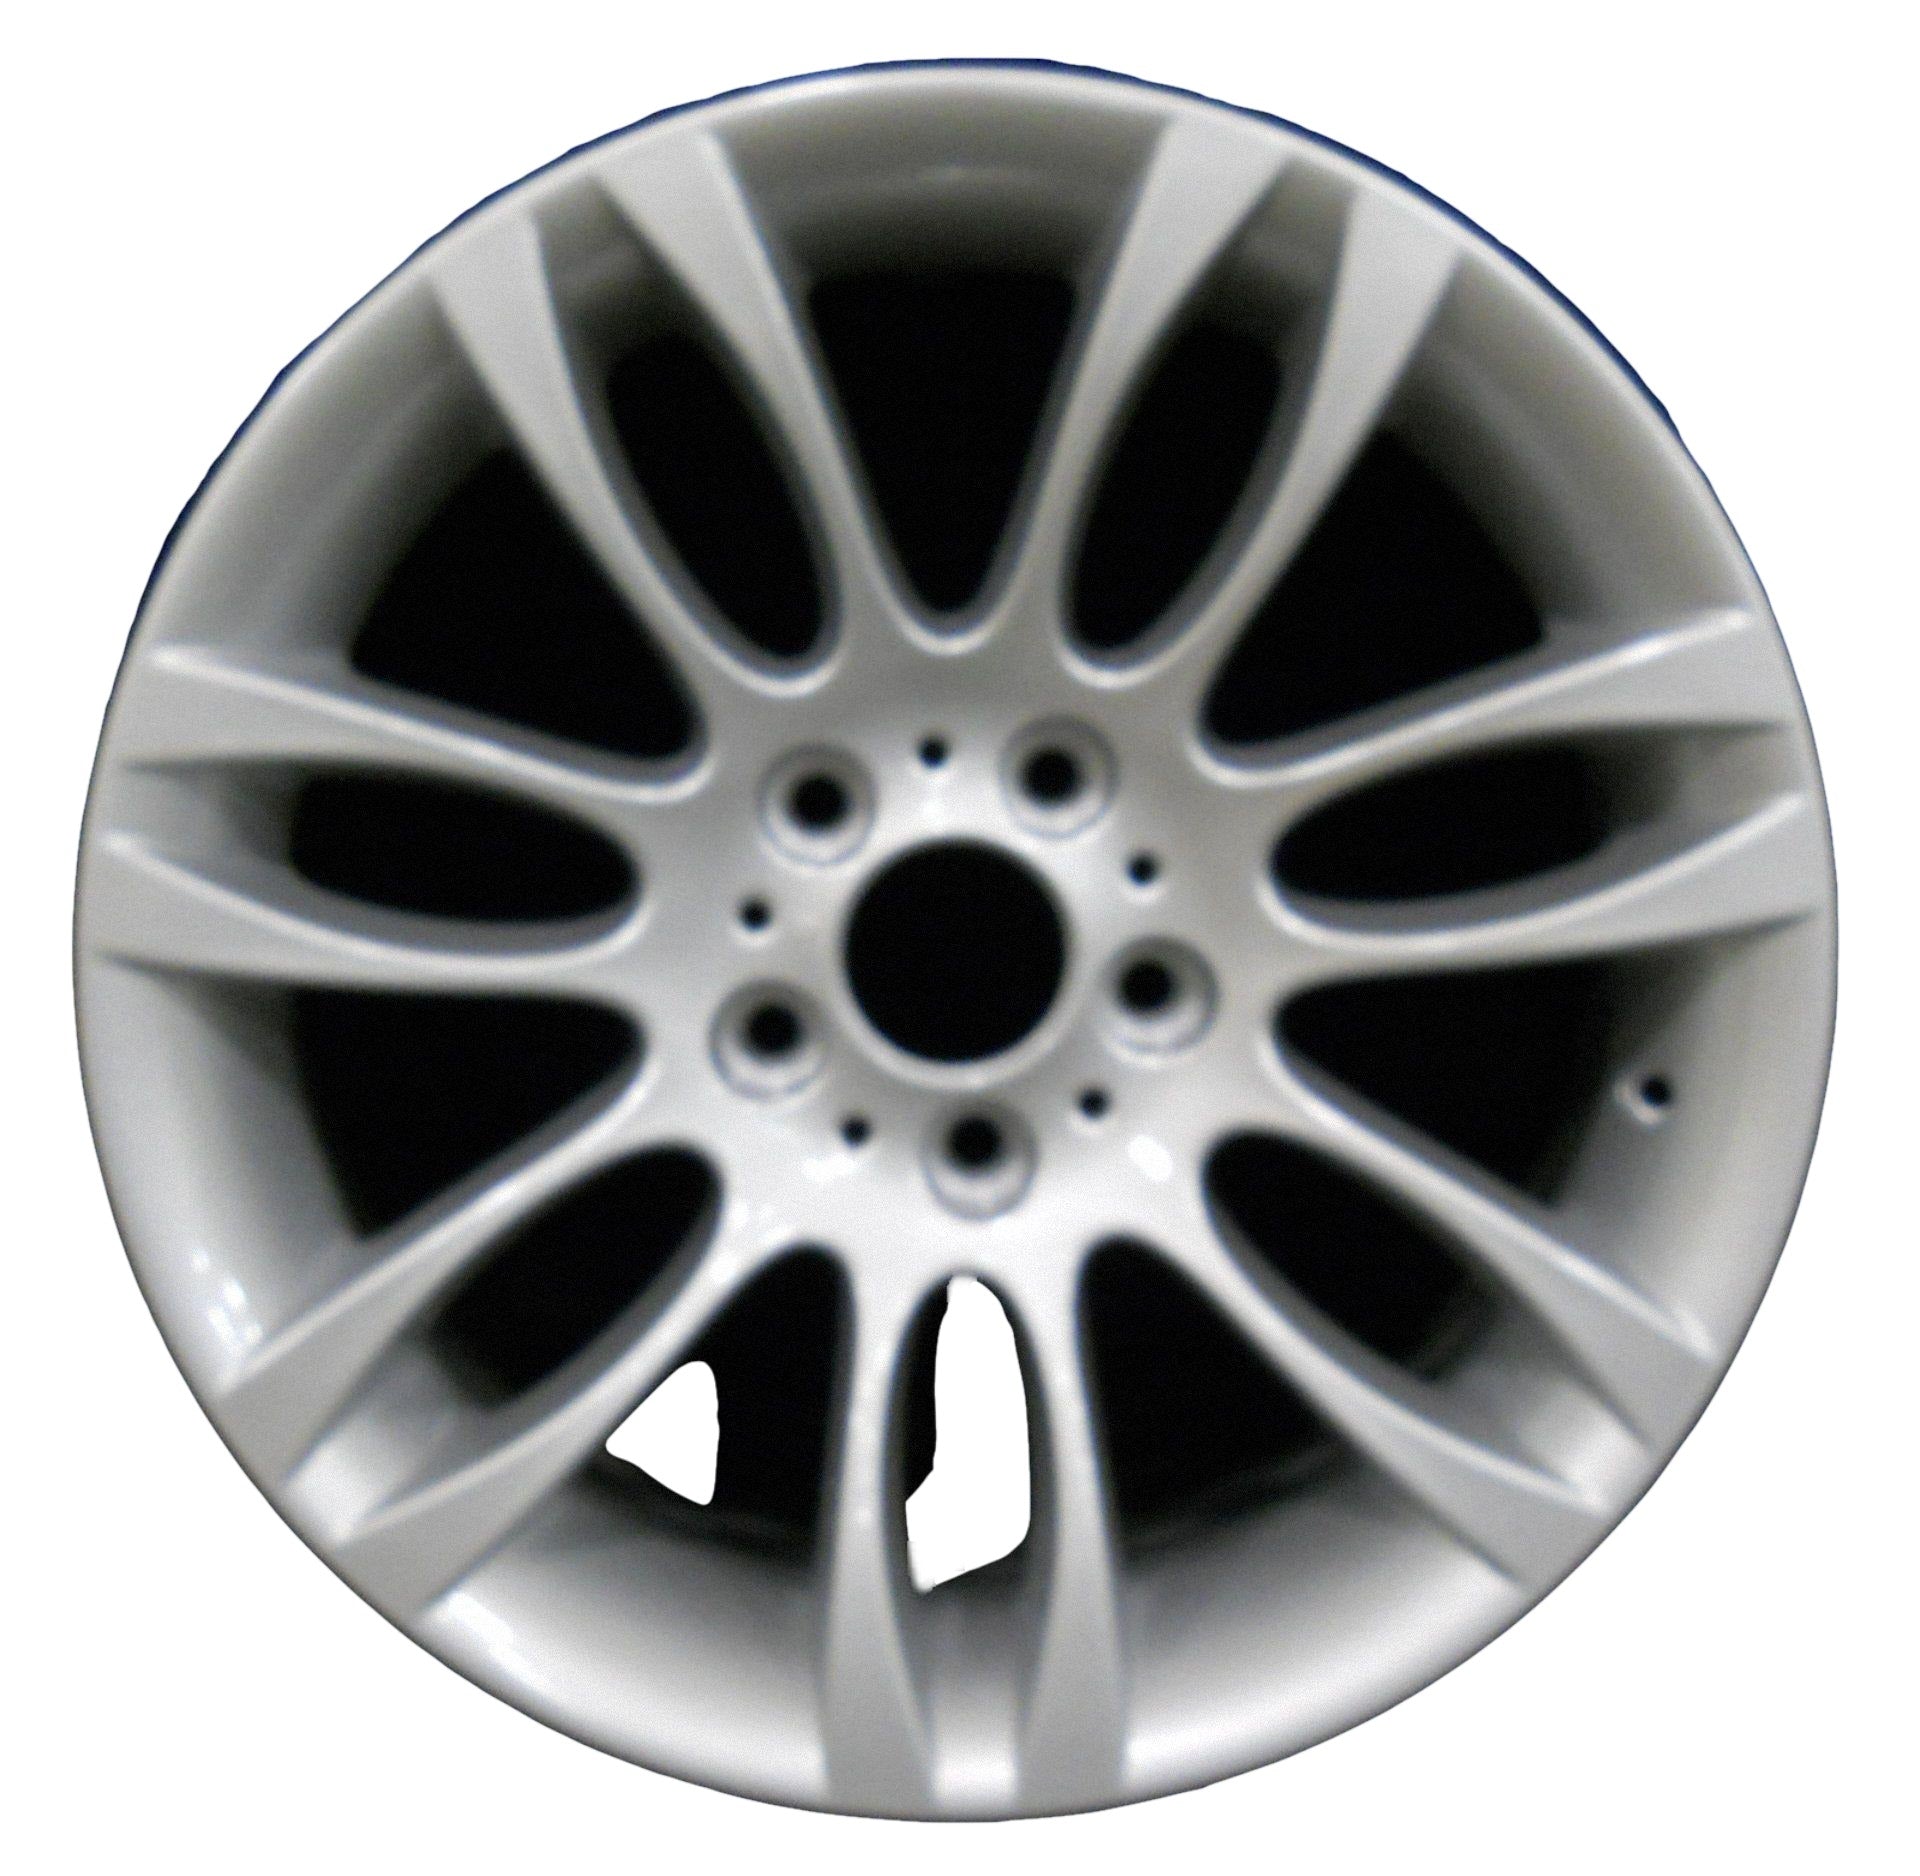 BMW 323i  2006, 2007, 2008, 2009, 2010, 2011 Factory OEM Car Wheel Size 18x8 Alloy WAO.59594FT.PS06.FF